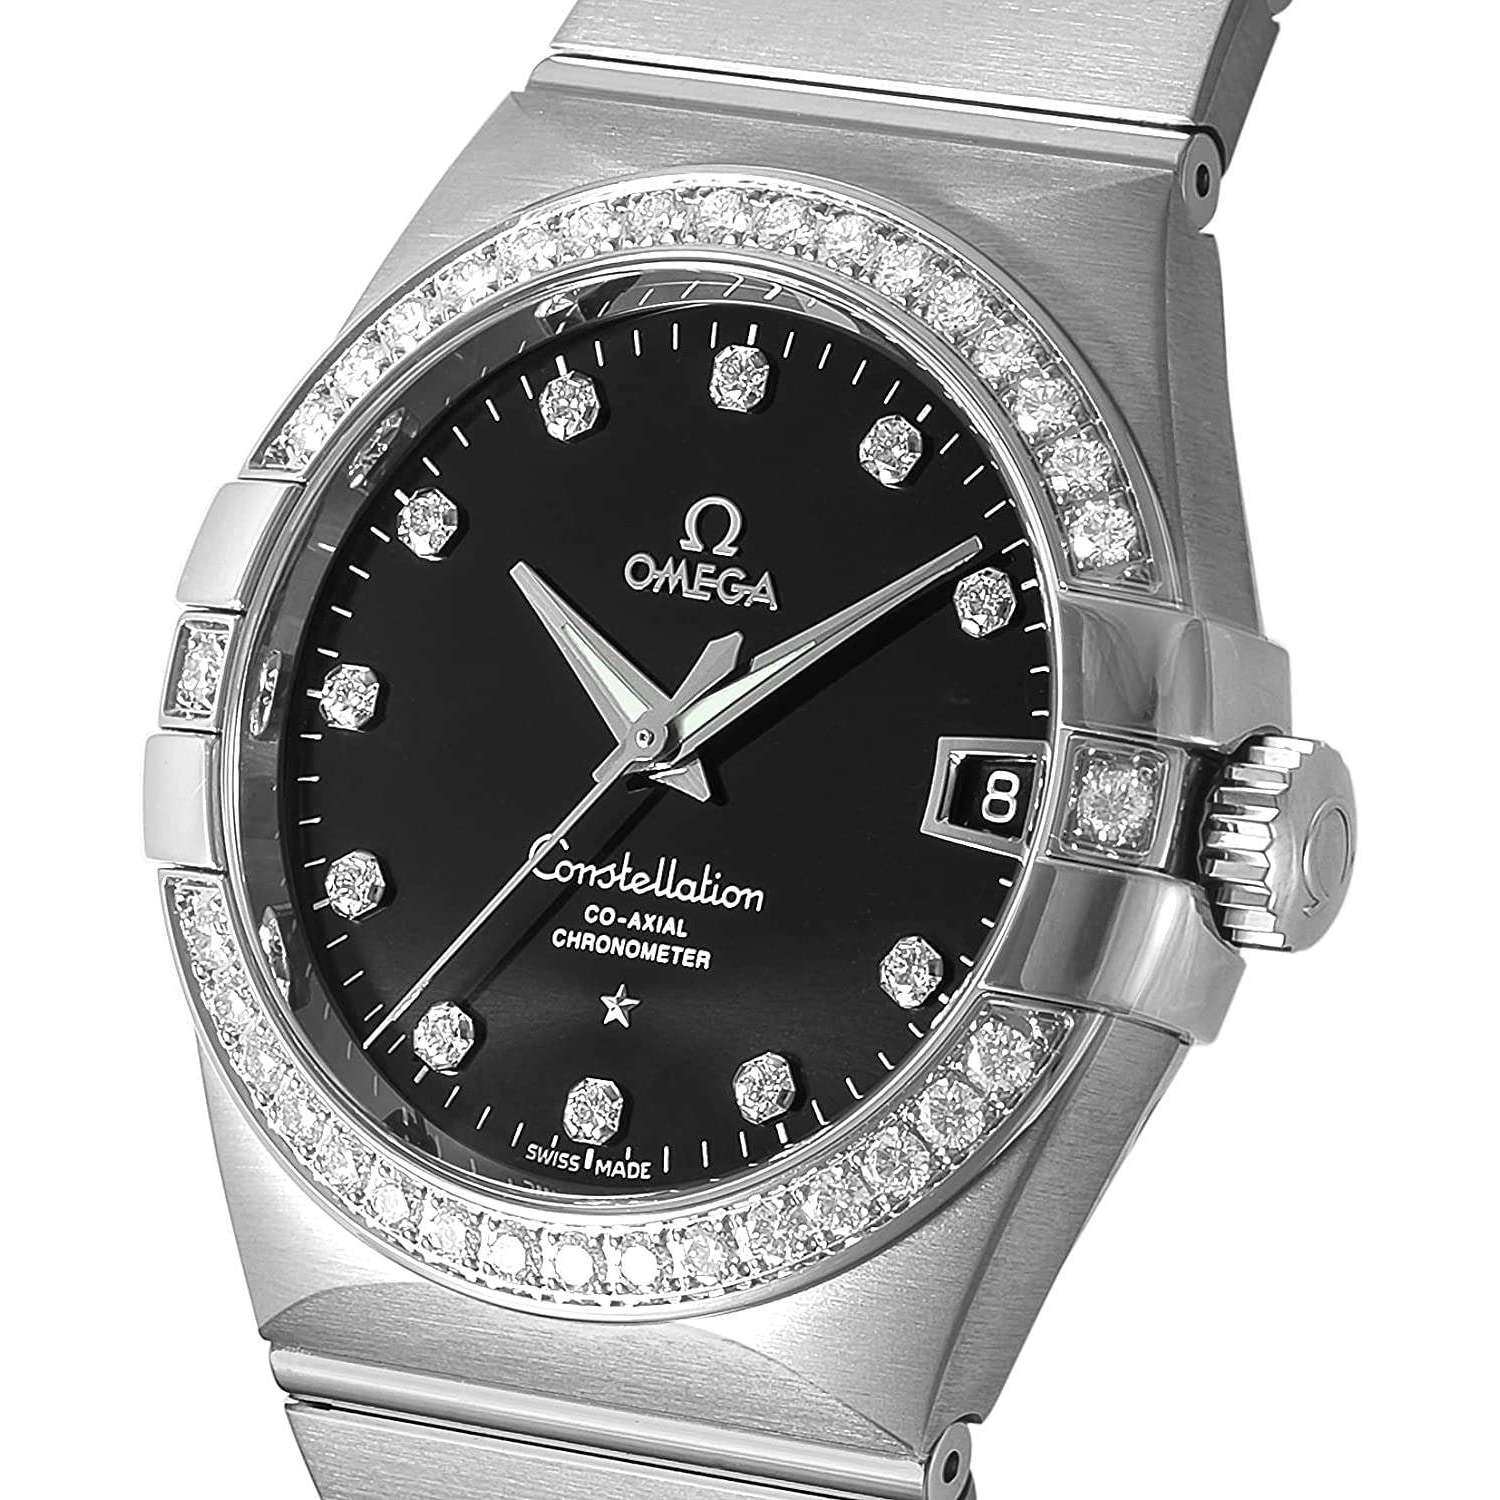 OMEGA CONSTELLATION CO-AXIAL CHRONOMETER 37.5 MM MEN WATCH 123.55.38.21.51.001 - ROOK JAPAN